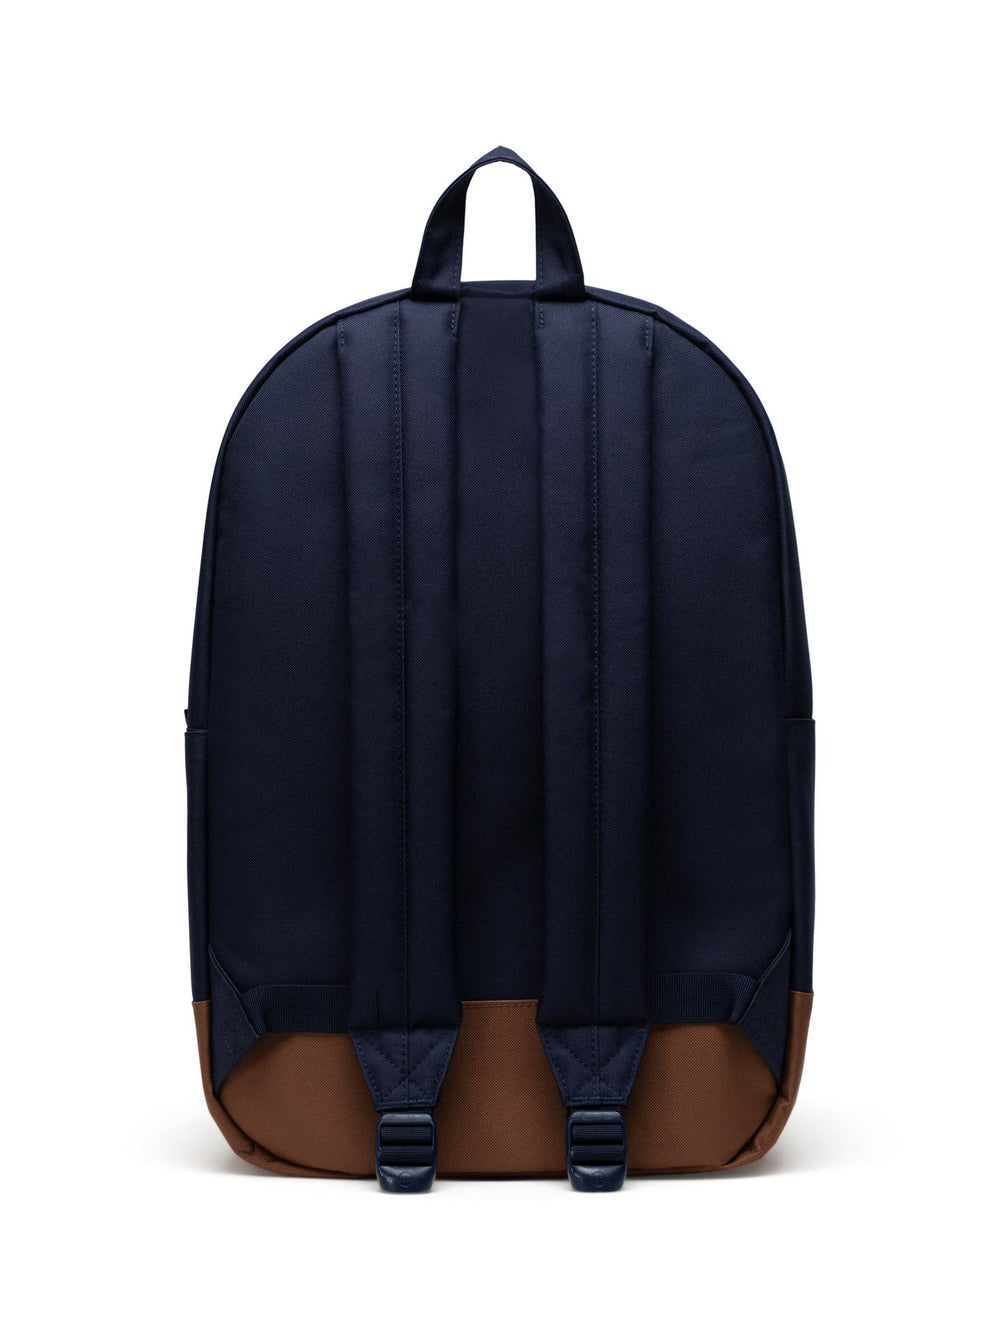 HERSCHEL SUPPLY CO. HERITAGE ECO BACKPACK - PEACOAT - CLEARANCE